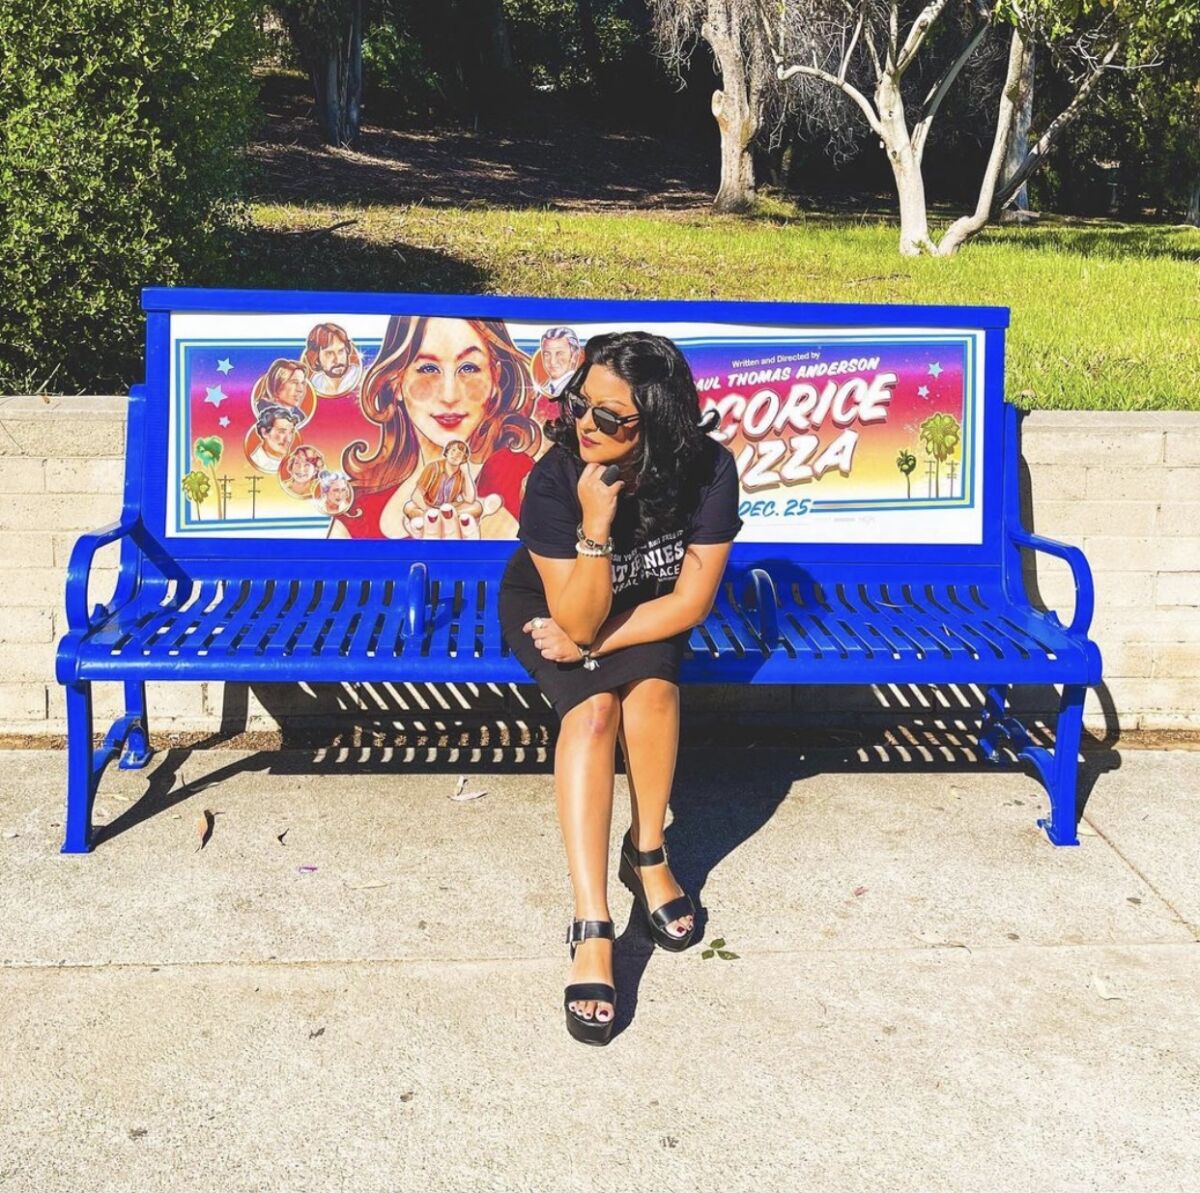 A woman sits on a bus bench that displays a "Licorice Pizza" movie poster.